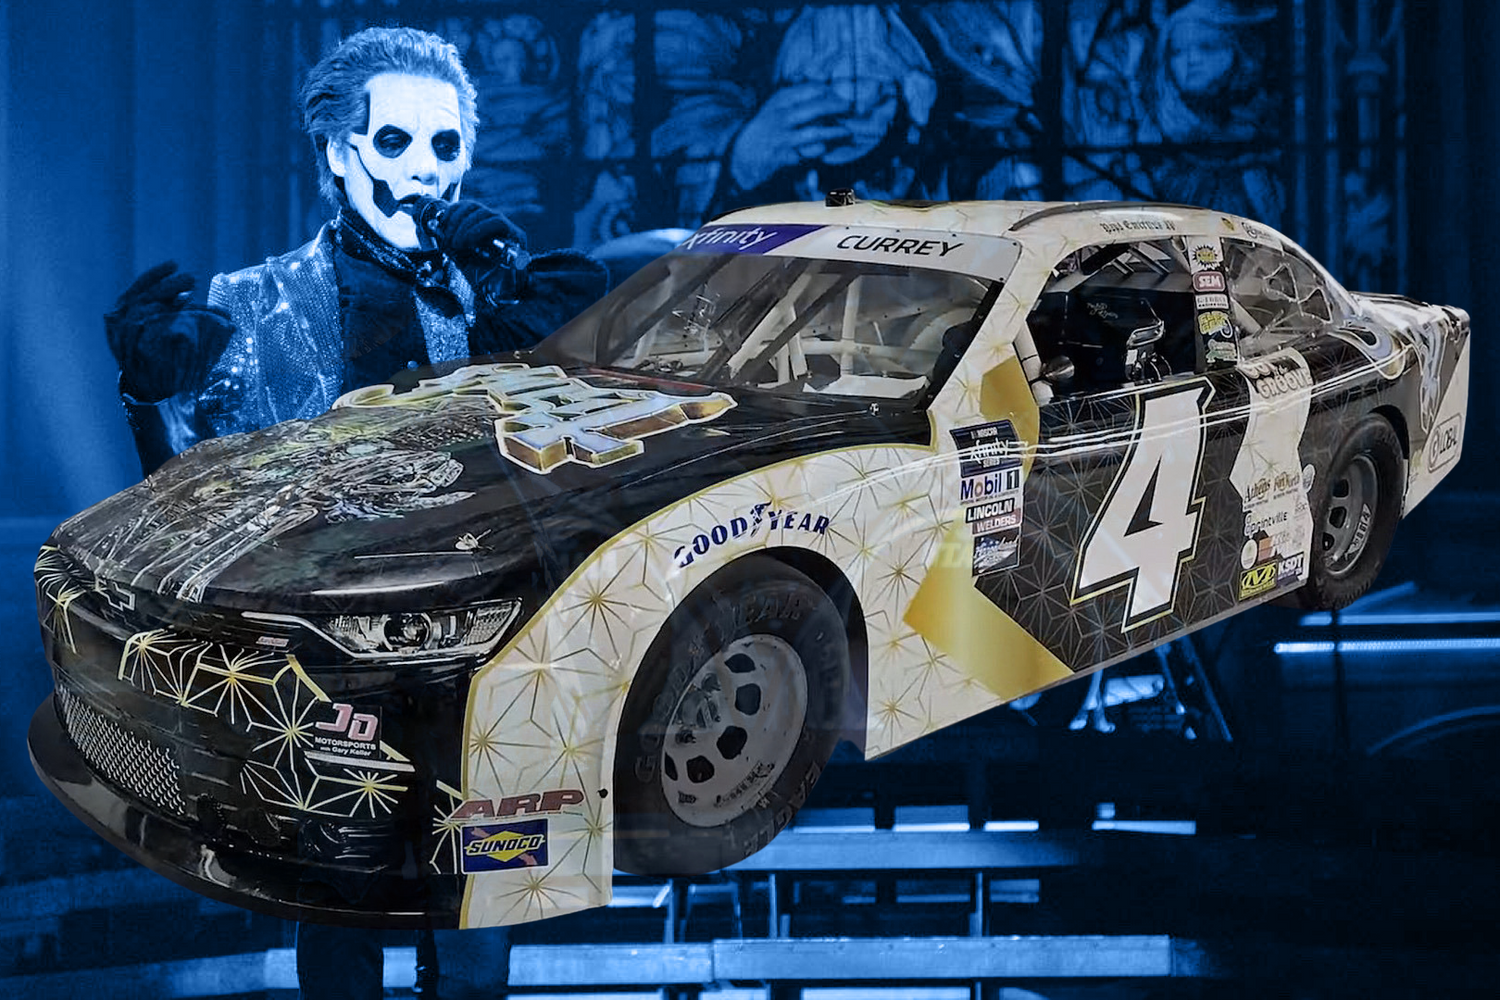 Ghost will make their NASCAR debut with #4 'Impera' Chevy